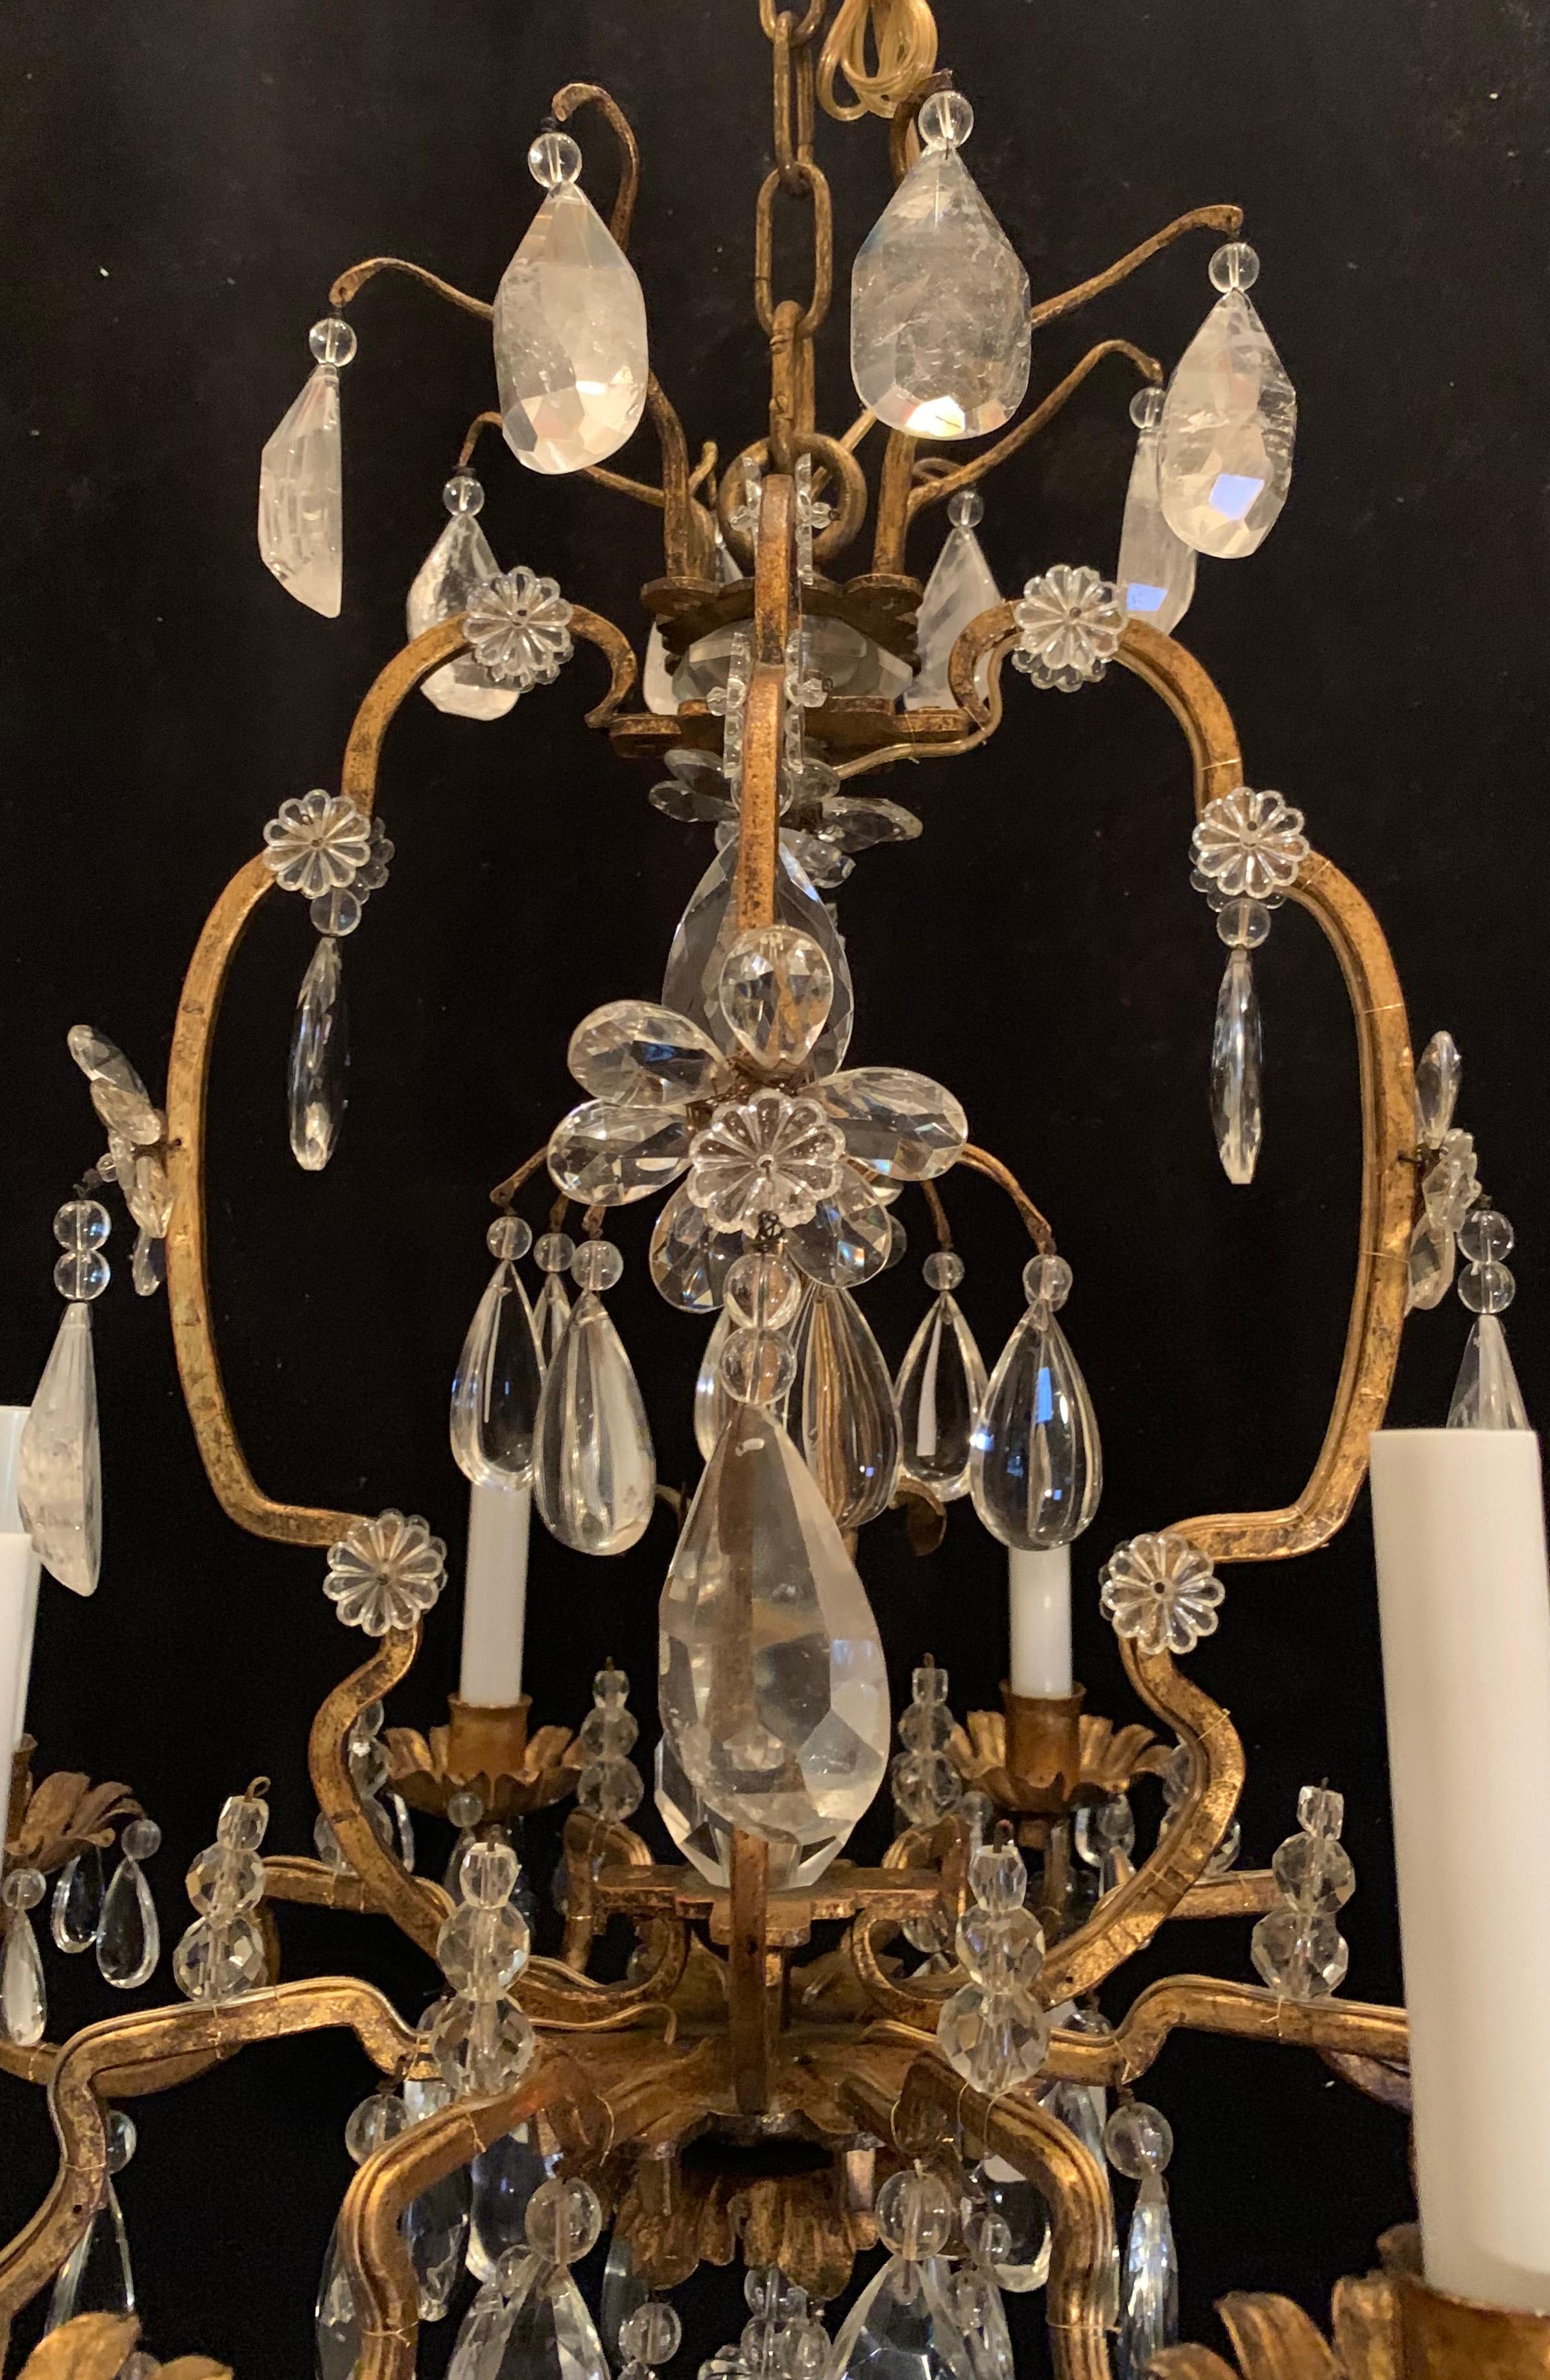 A wonderful rock crystal and gold gilt Baguès / Louis XVI style 8 candelabra light, bird cage form chandelier, completely rewired with new sockets.